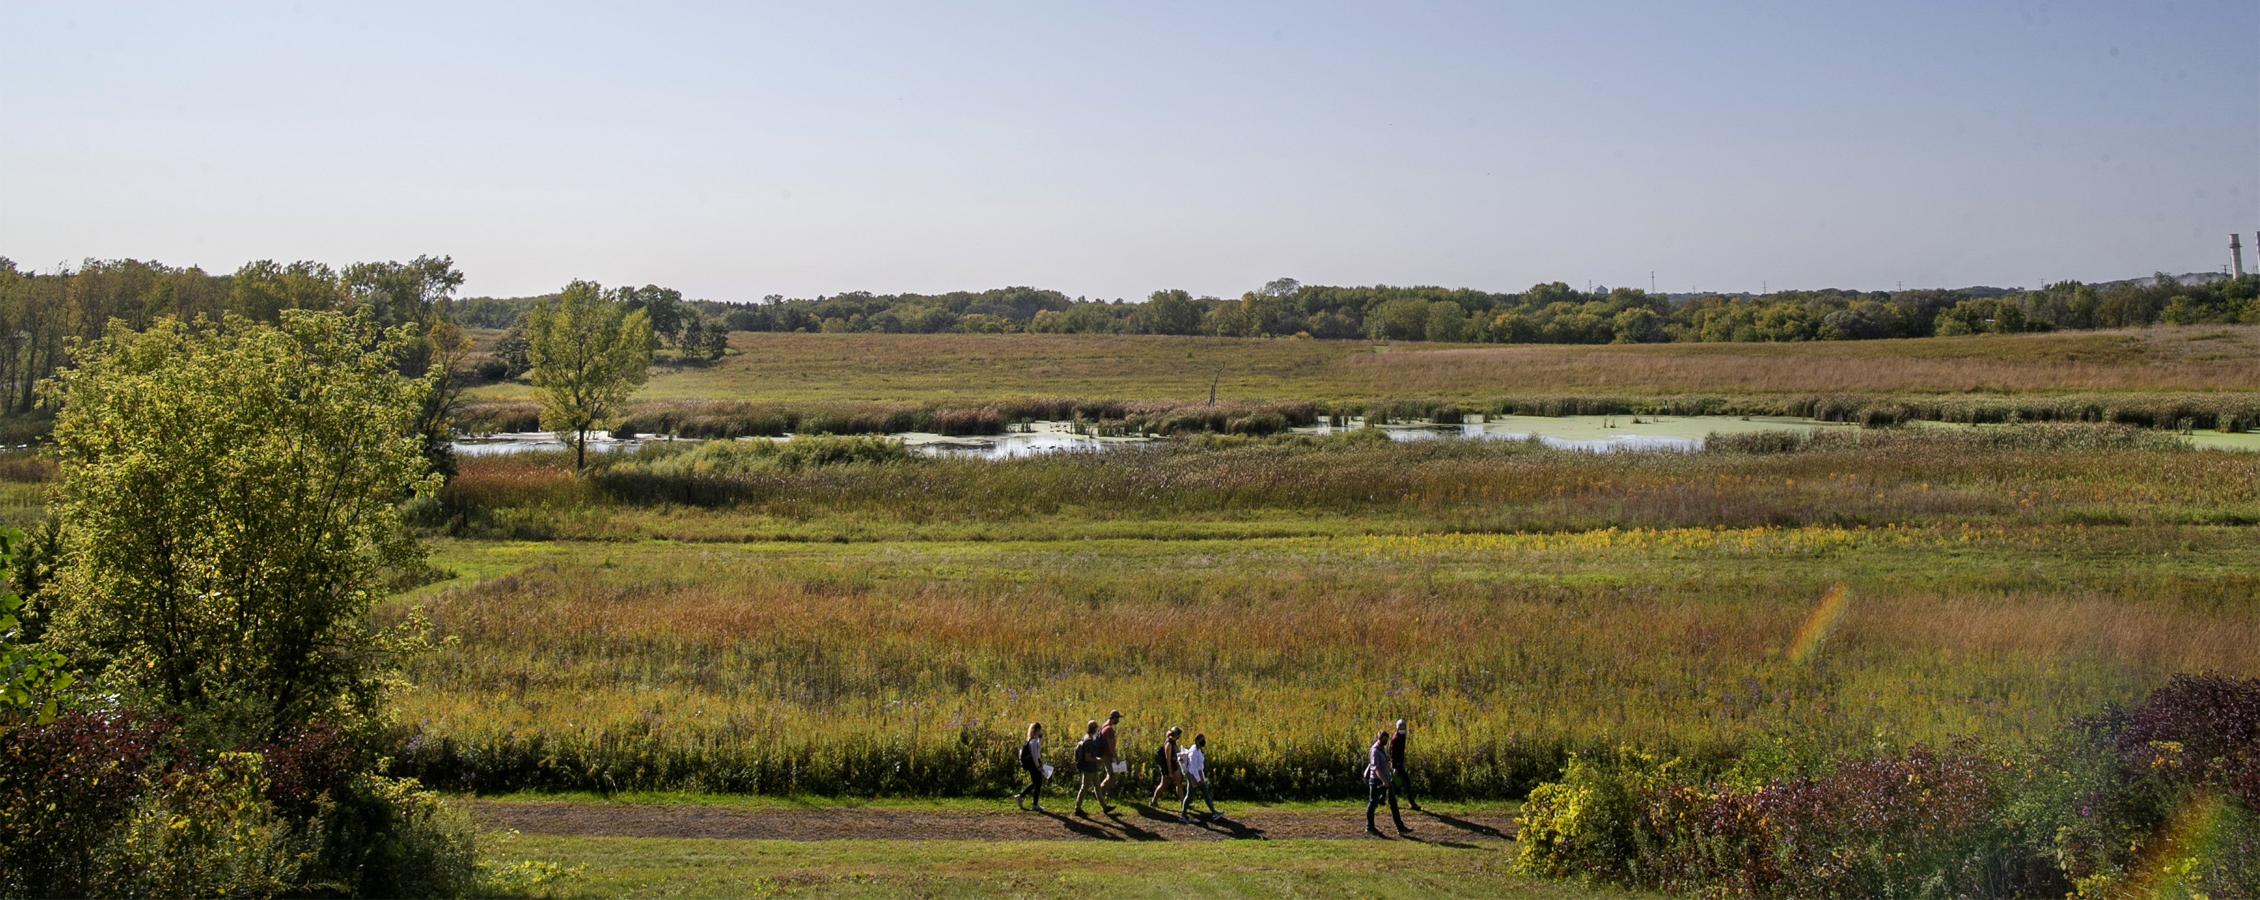 Students walk through an open field with a small body of water.